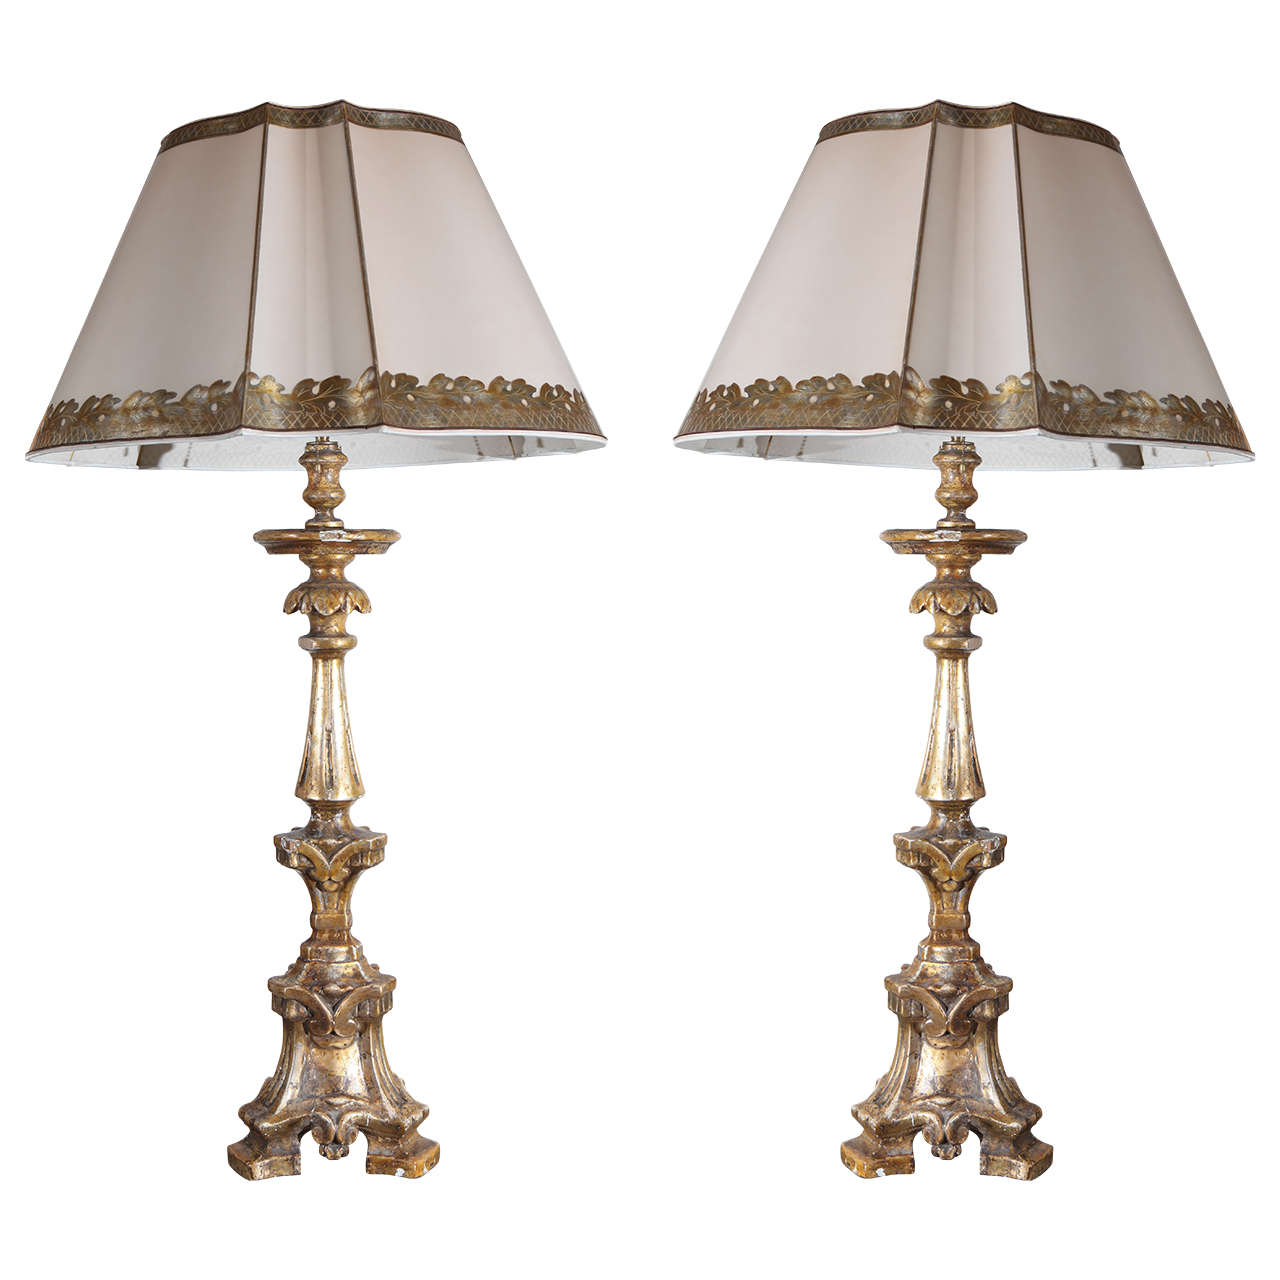 Pair of Venetian Candlesticks Wired into Lamps, White Gold Gilded, 19th Century For Sale